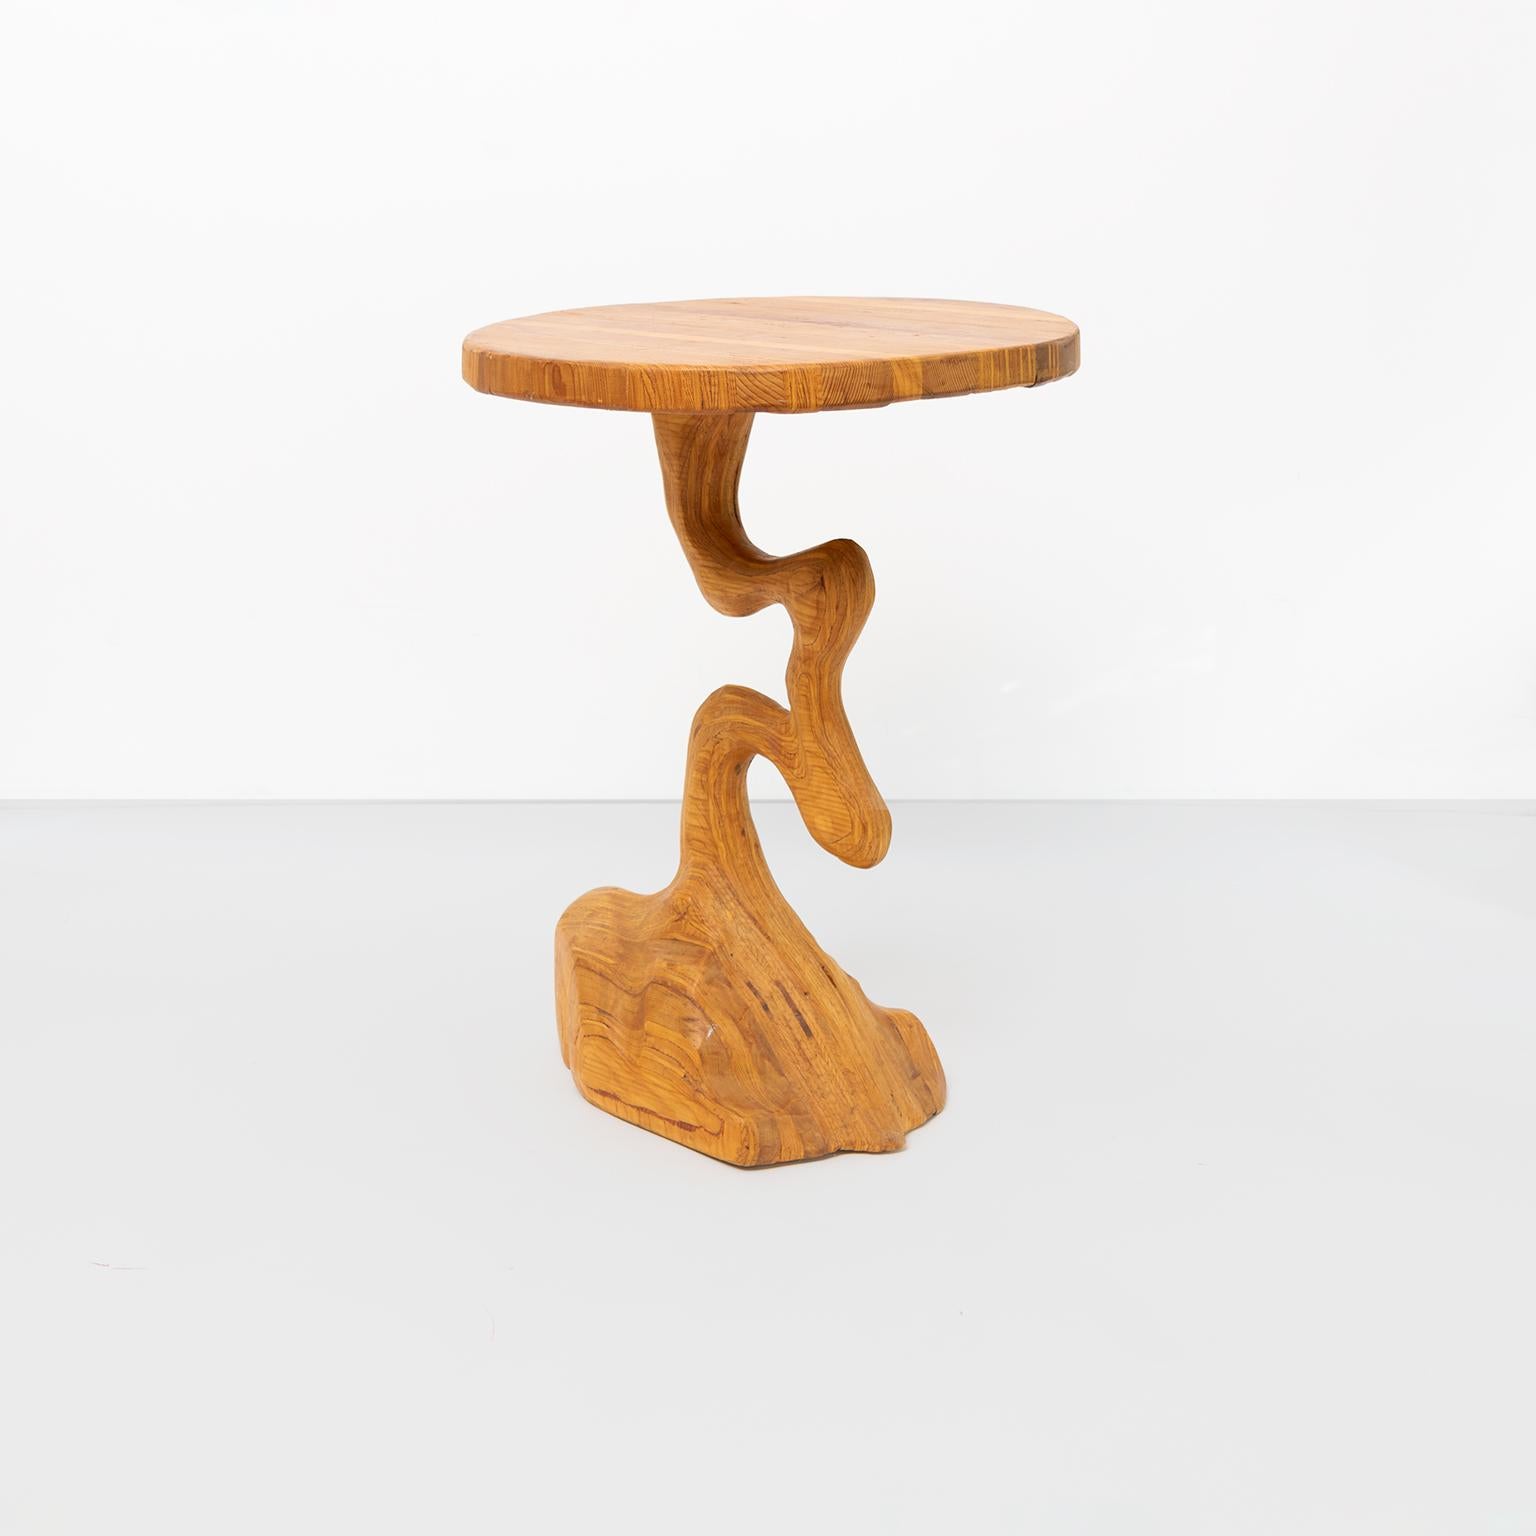 Carved Scandinavian Modern Crooked Column Table